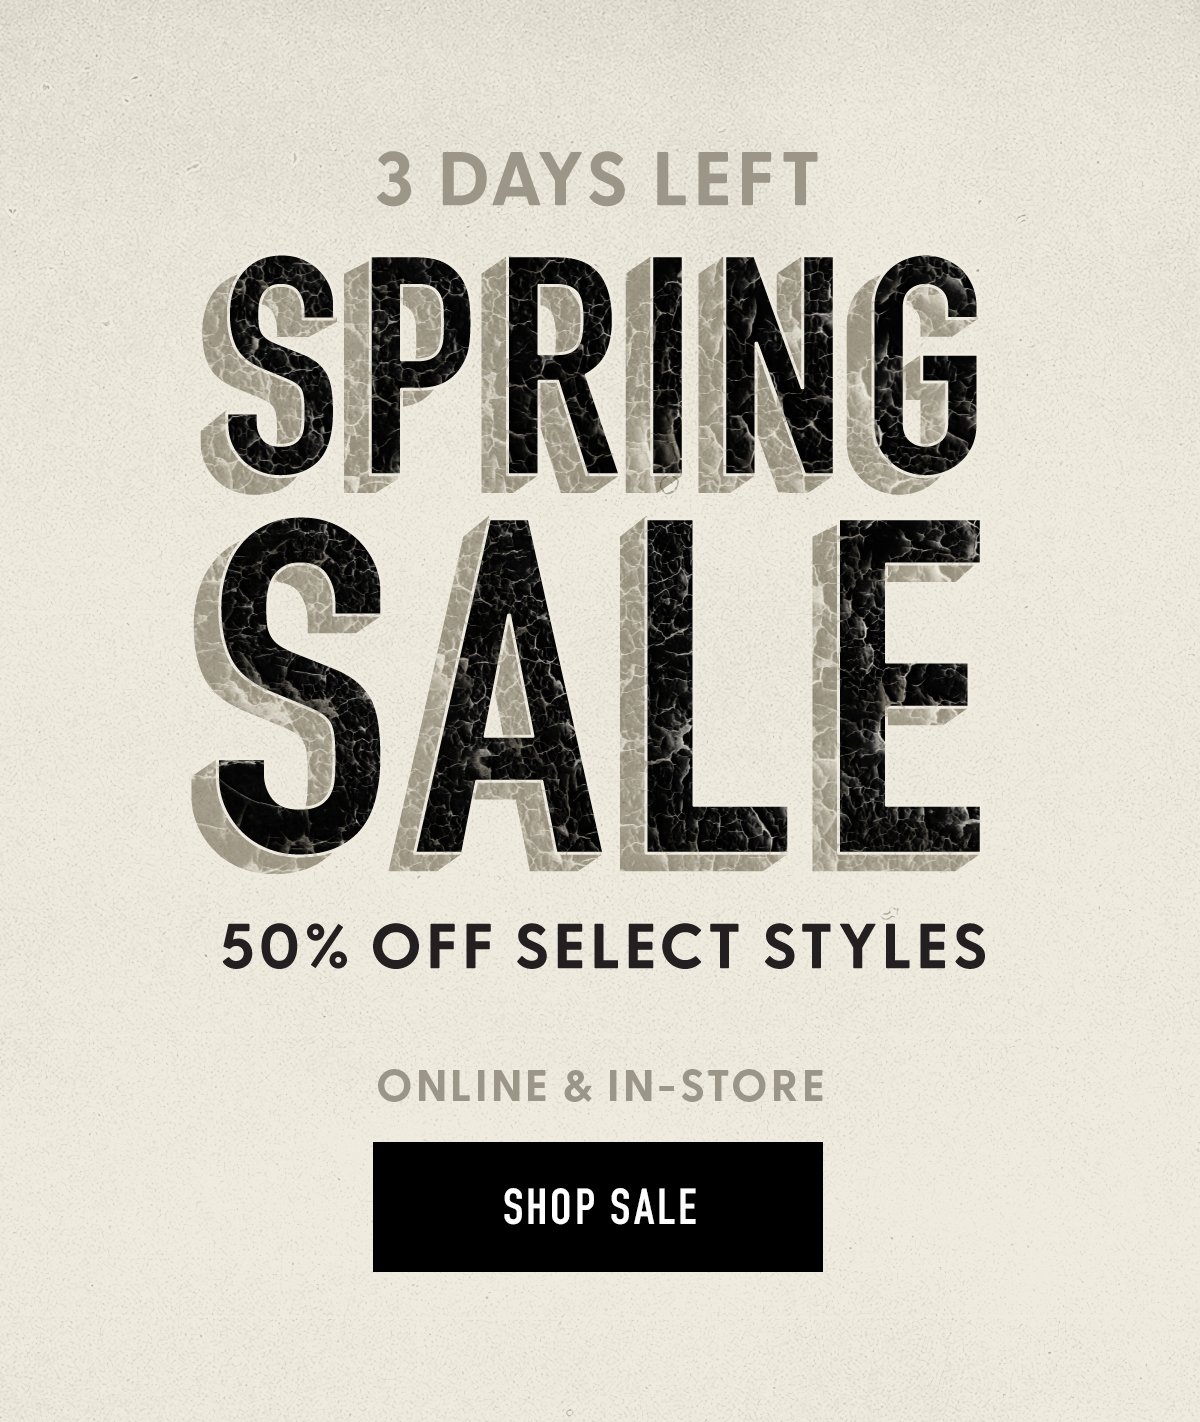 3 Days Left | Spring Sale | 50% Off Select Styles | Tees Starting at $15 | Online & In-Store | Shop Sale